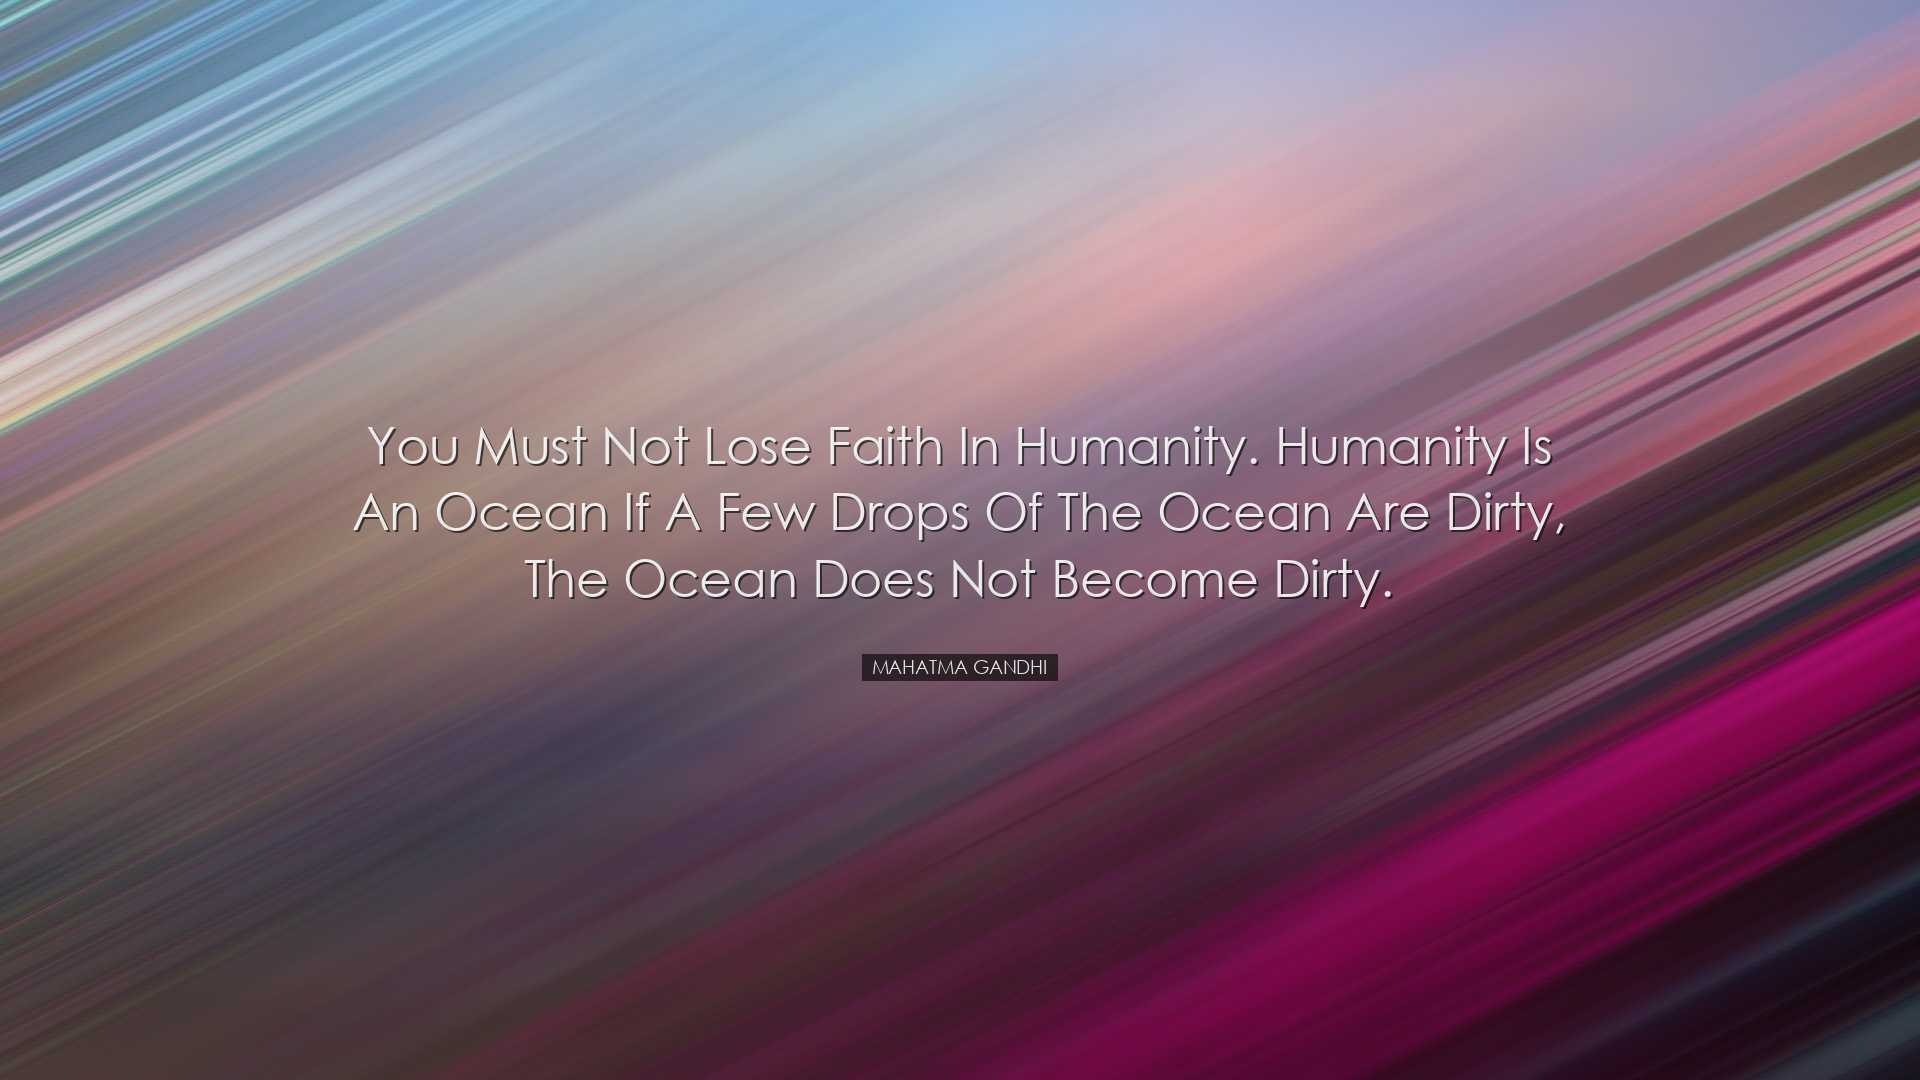 You must not lose faith in humanity. Humanity is an ocean if a few